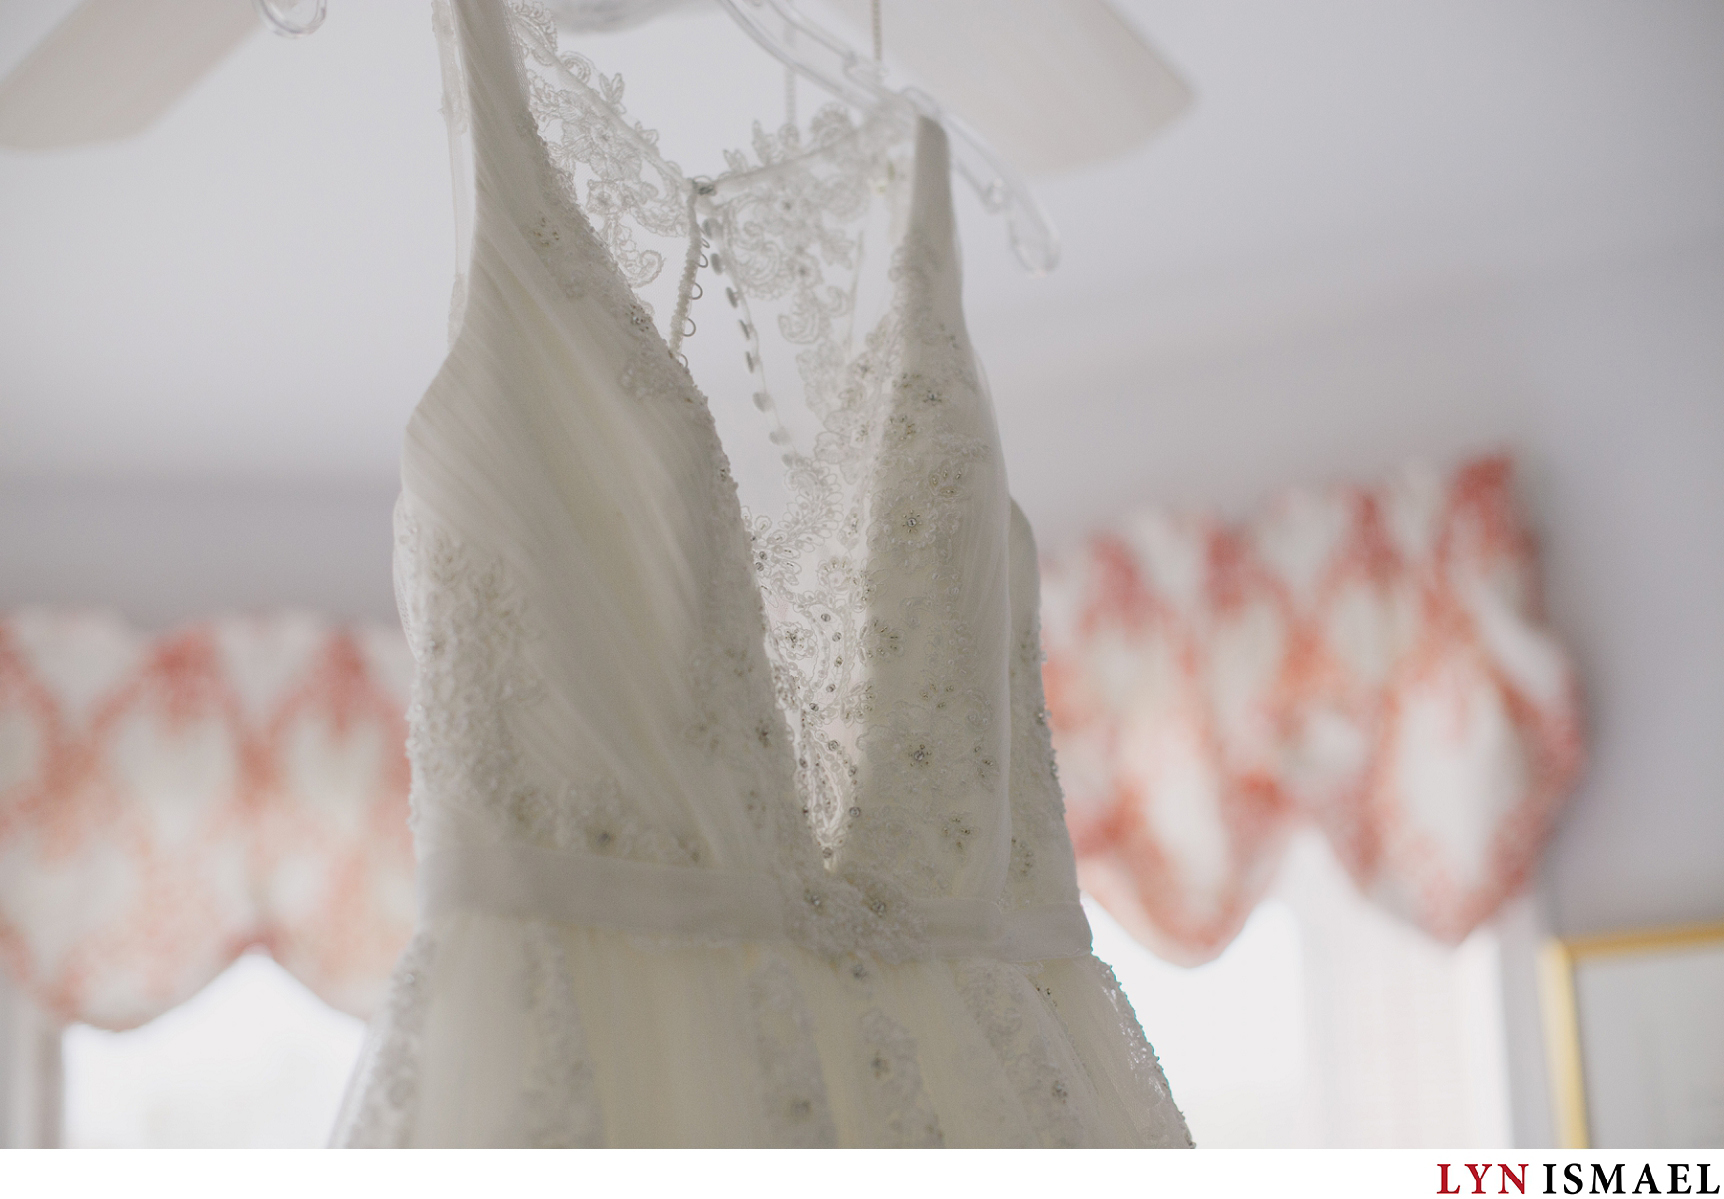 Detail of the bride's wedding dress